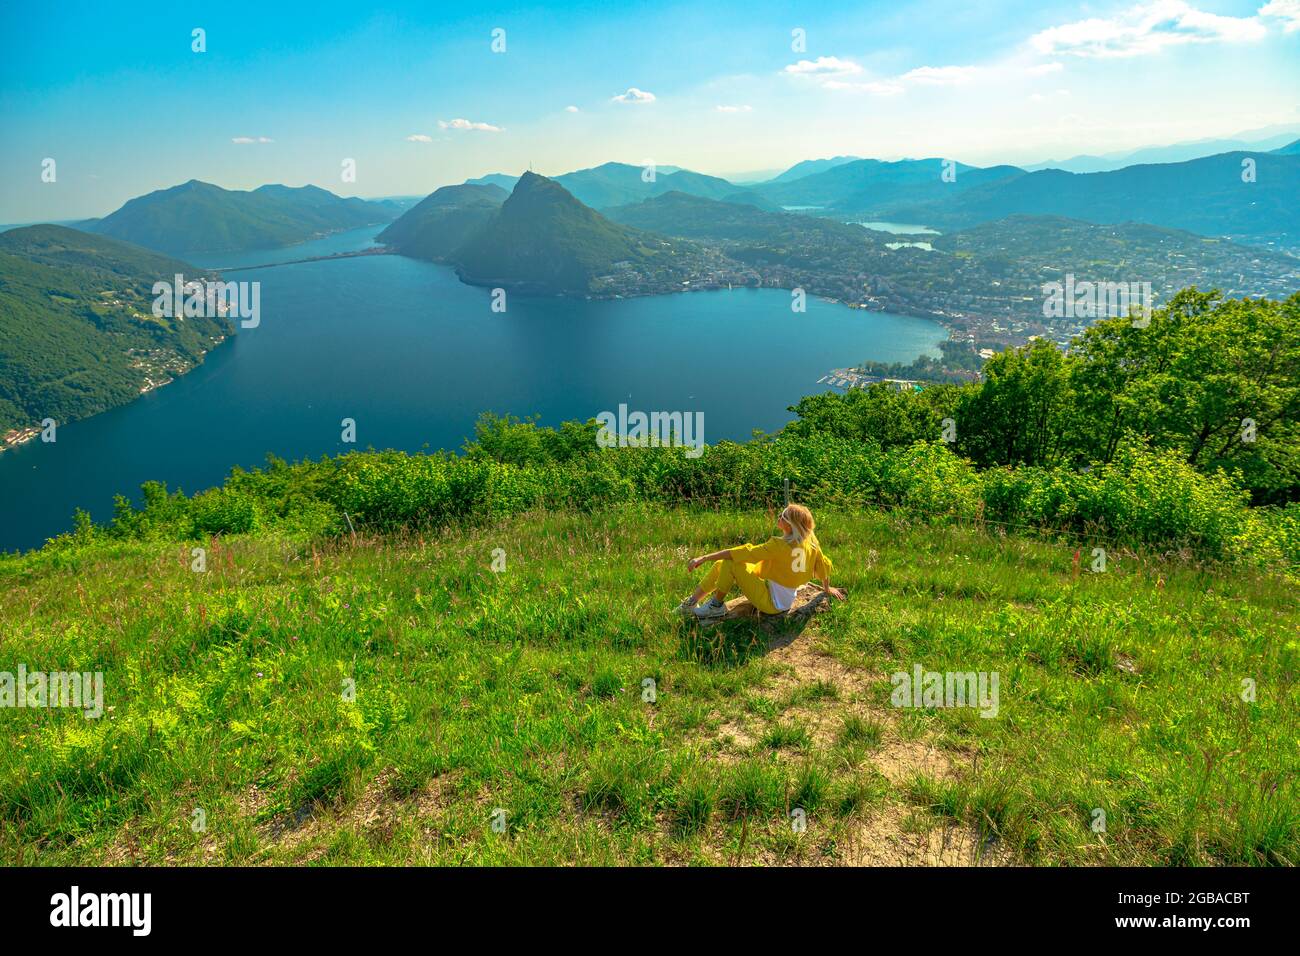 Woman on top of Lugano Swiss city by Lugano Lake in Switzerland. Aerial view lookout from Monte Bre Mount. Lugano cityscape with San Salvatore mount Stock Photo